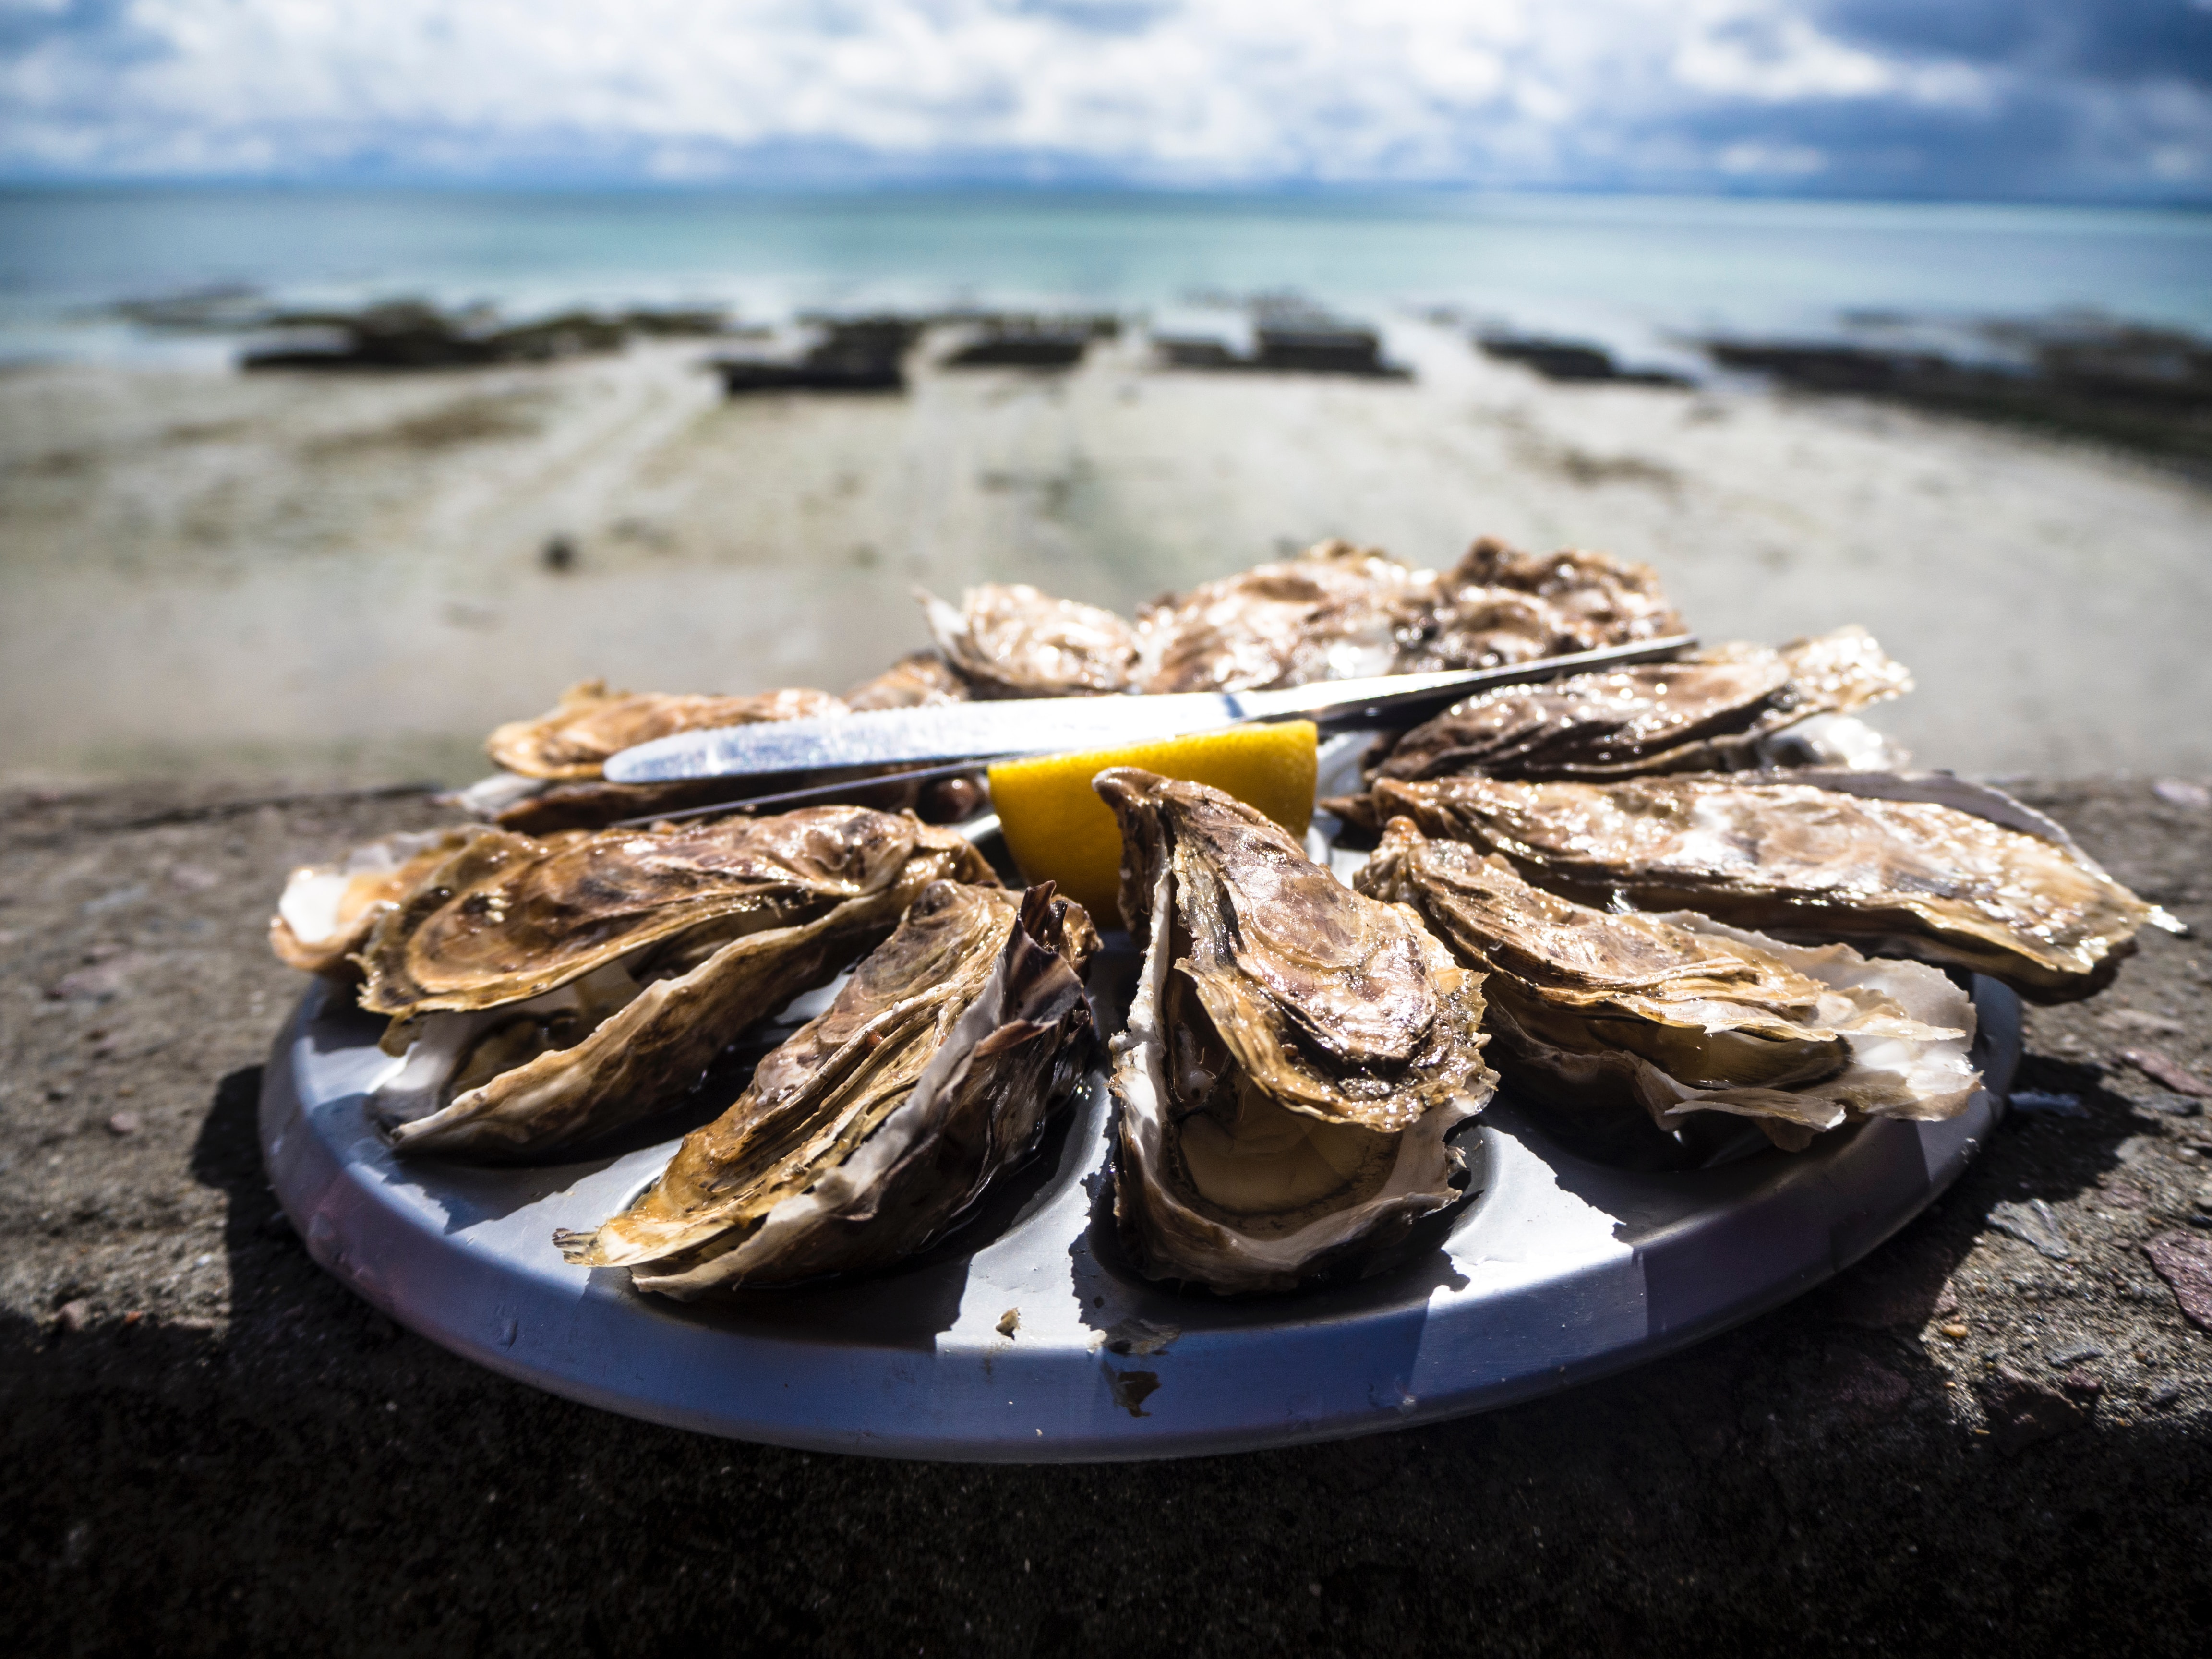 Two Die After Eating Raw Louisiana Oysters In Florida